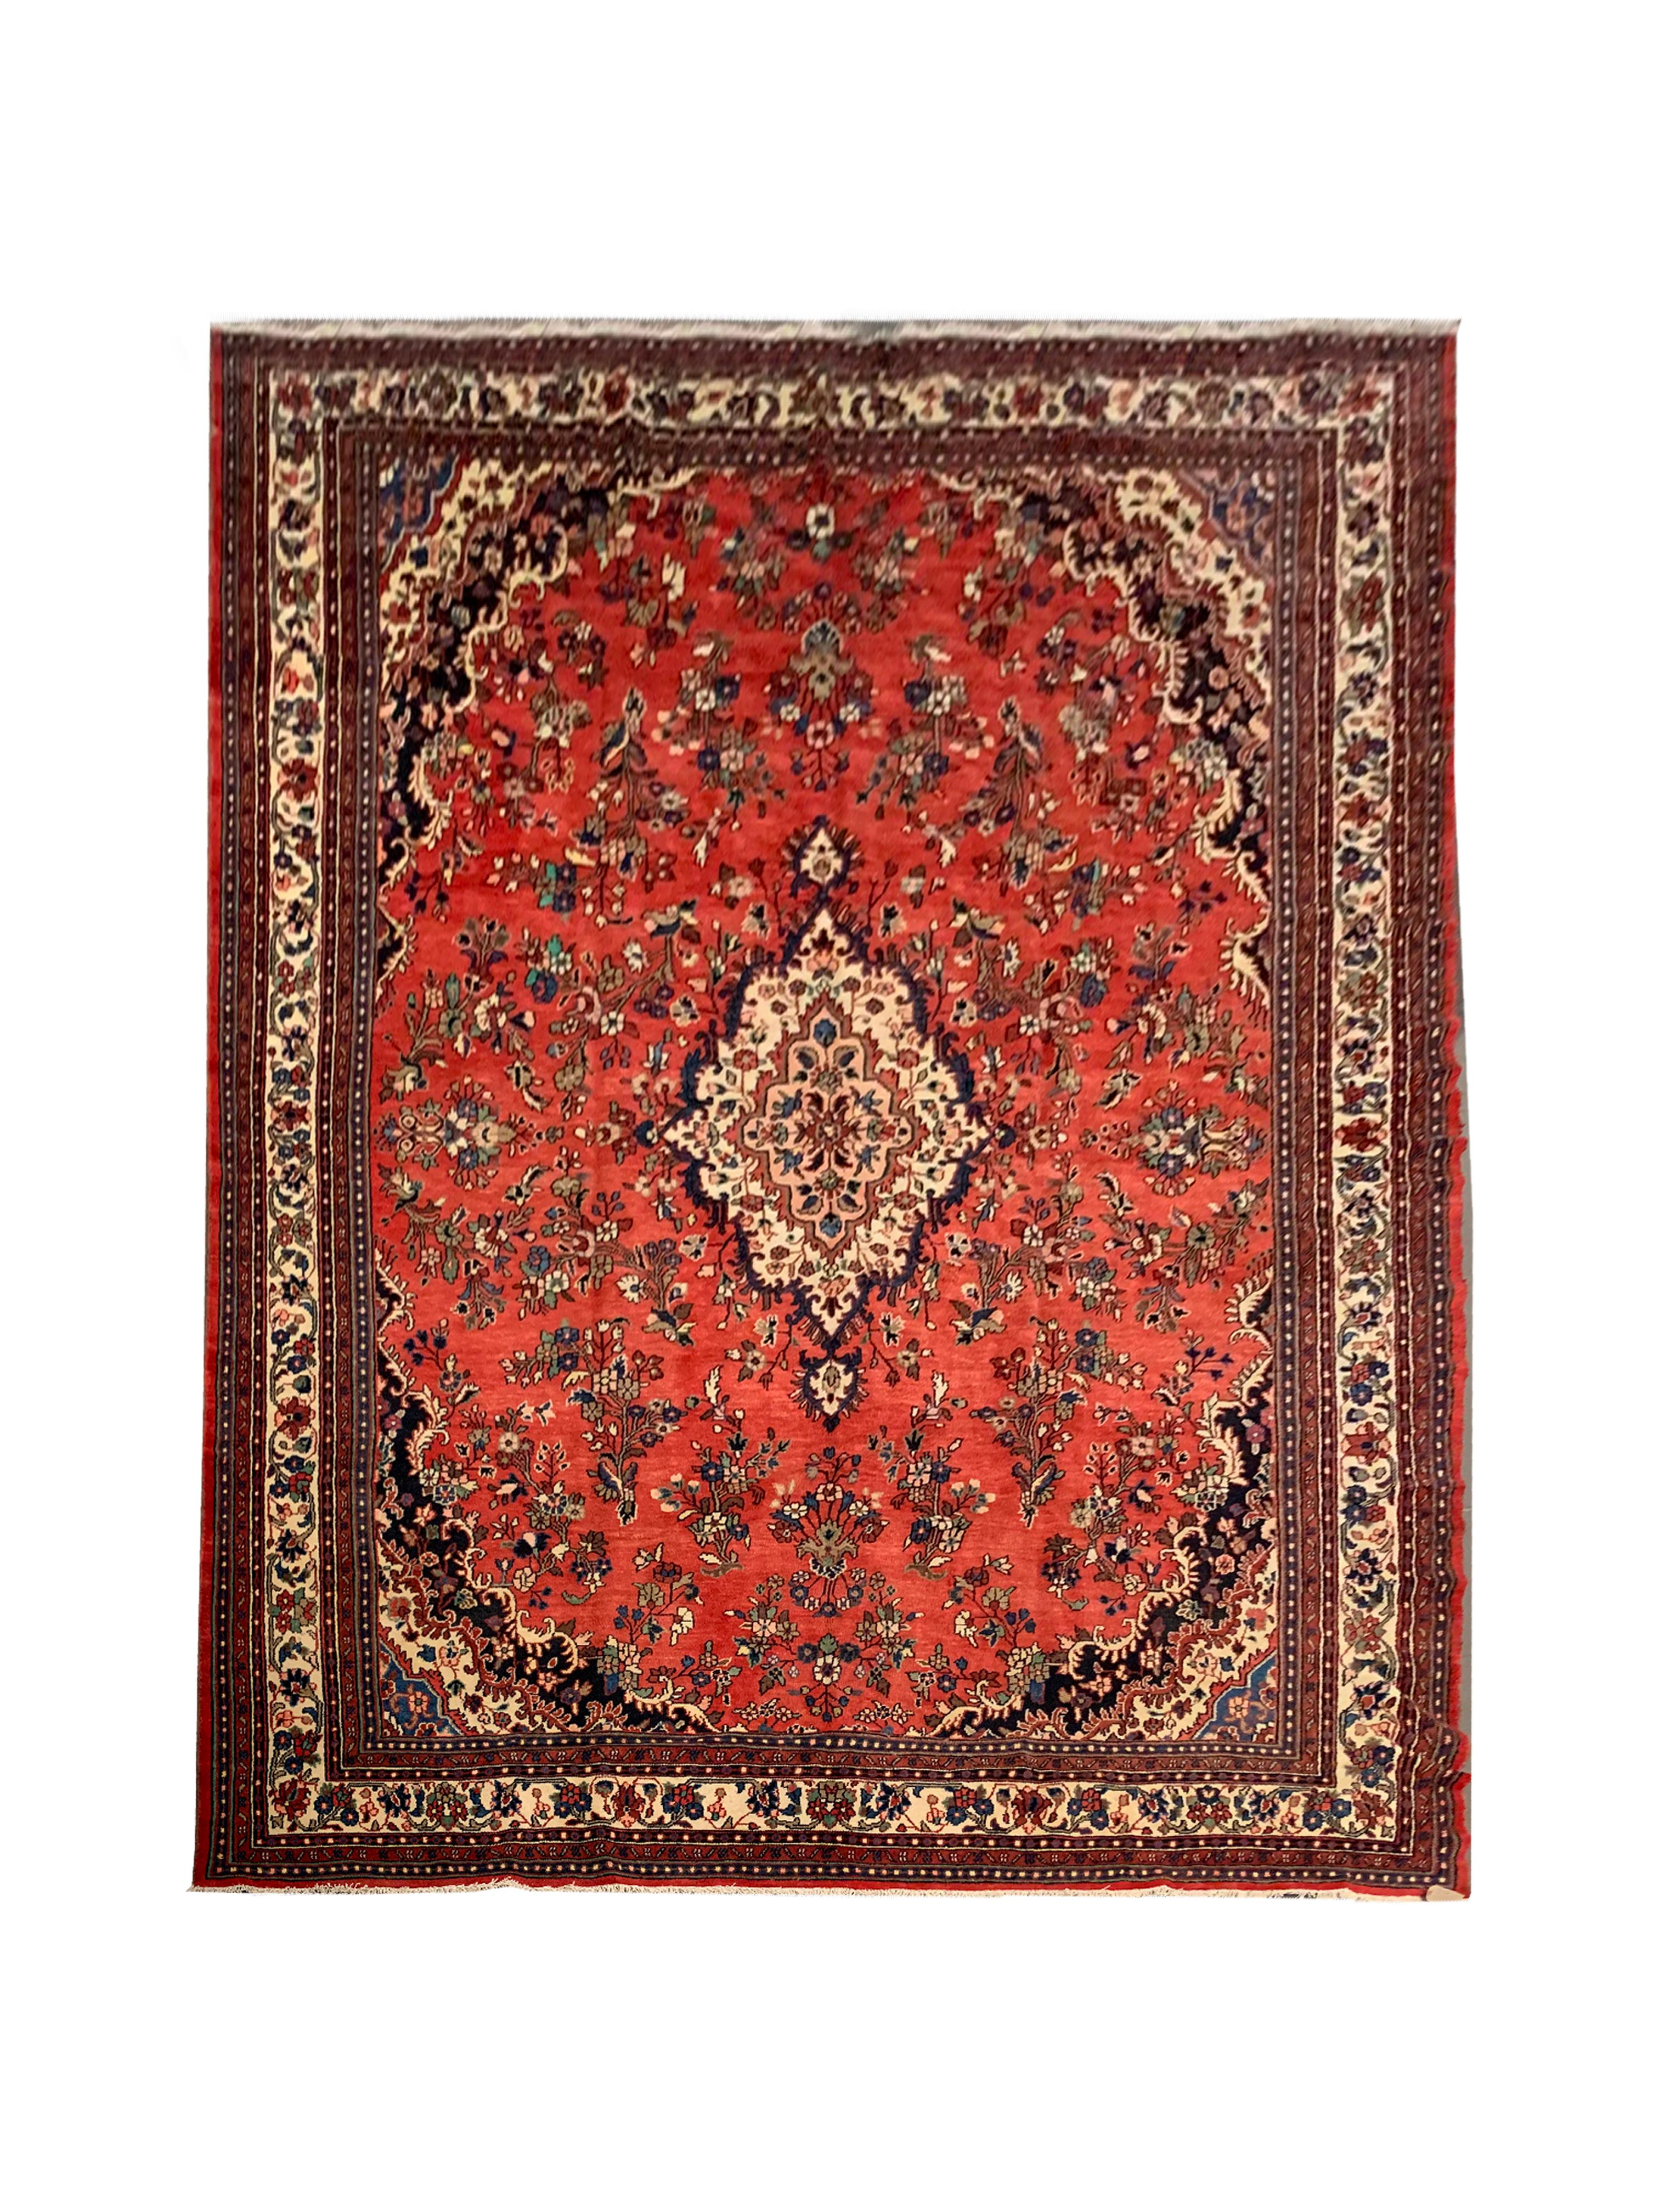 This fantastic accent carpet has been woven with a large red field that has been intricately decorated with a beautiful floral medallion and surrounding design. The medallion is cream with red, blue and pink accents that make up the fine floral